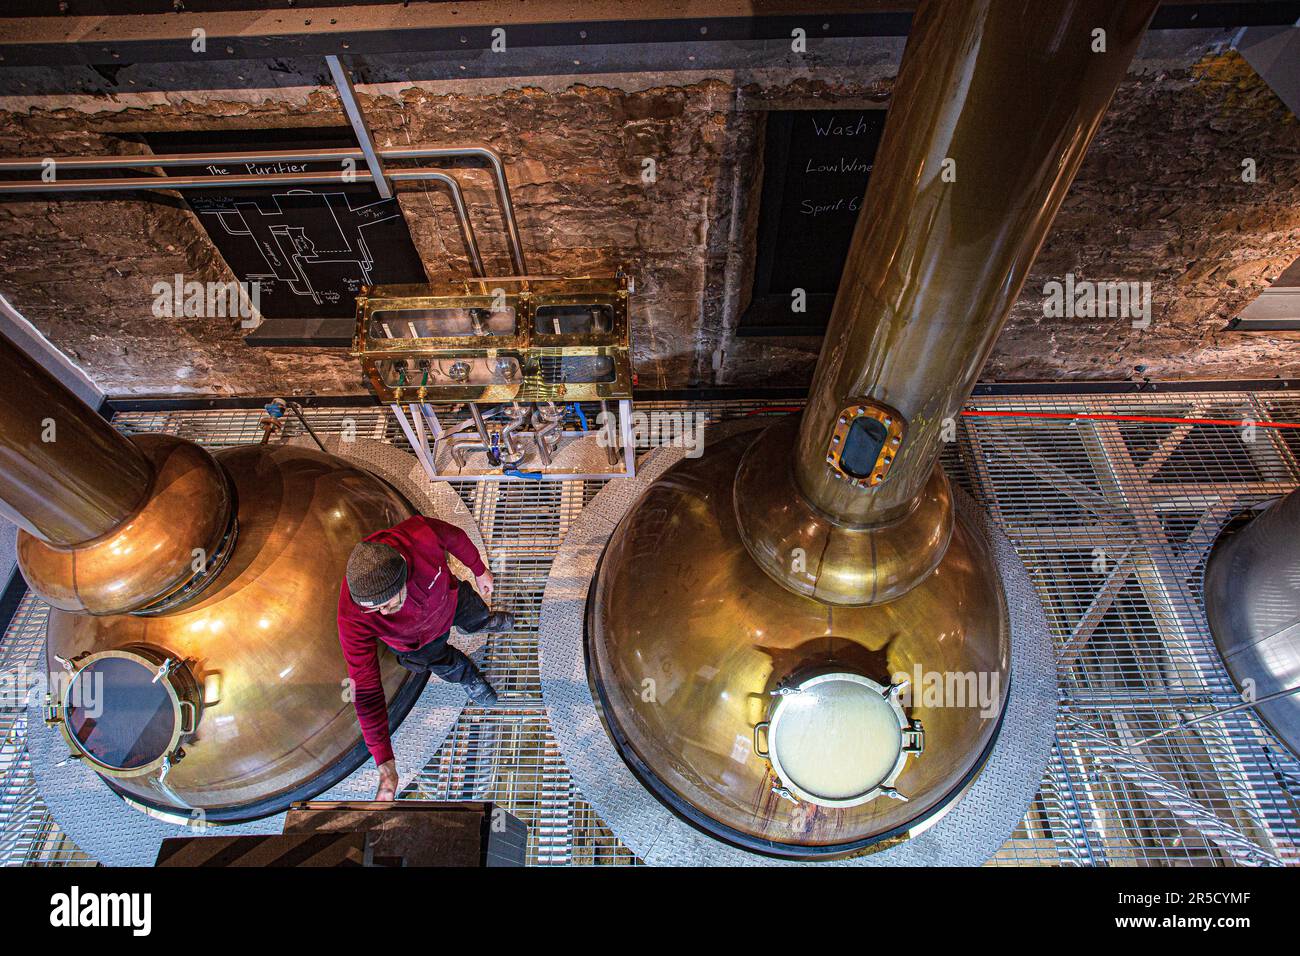 A distillery worker carries out various tasks involved in the production process of single malt whisky at the Holyrood whisky distillery Edinburgh, Stock Photo